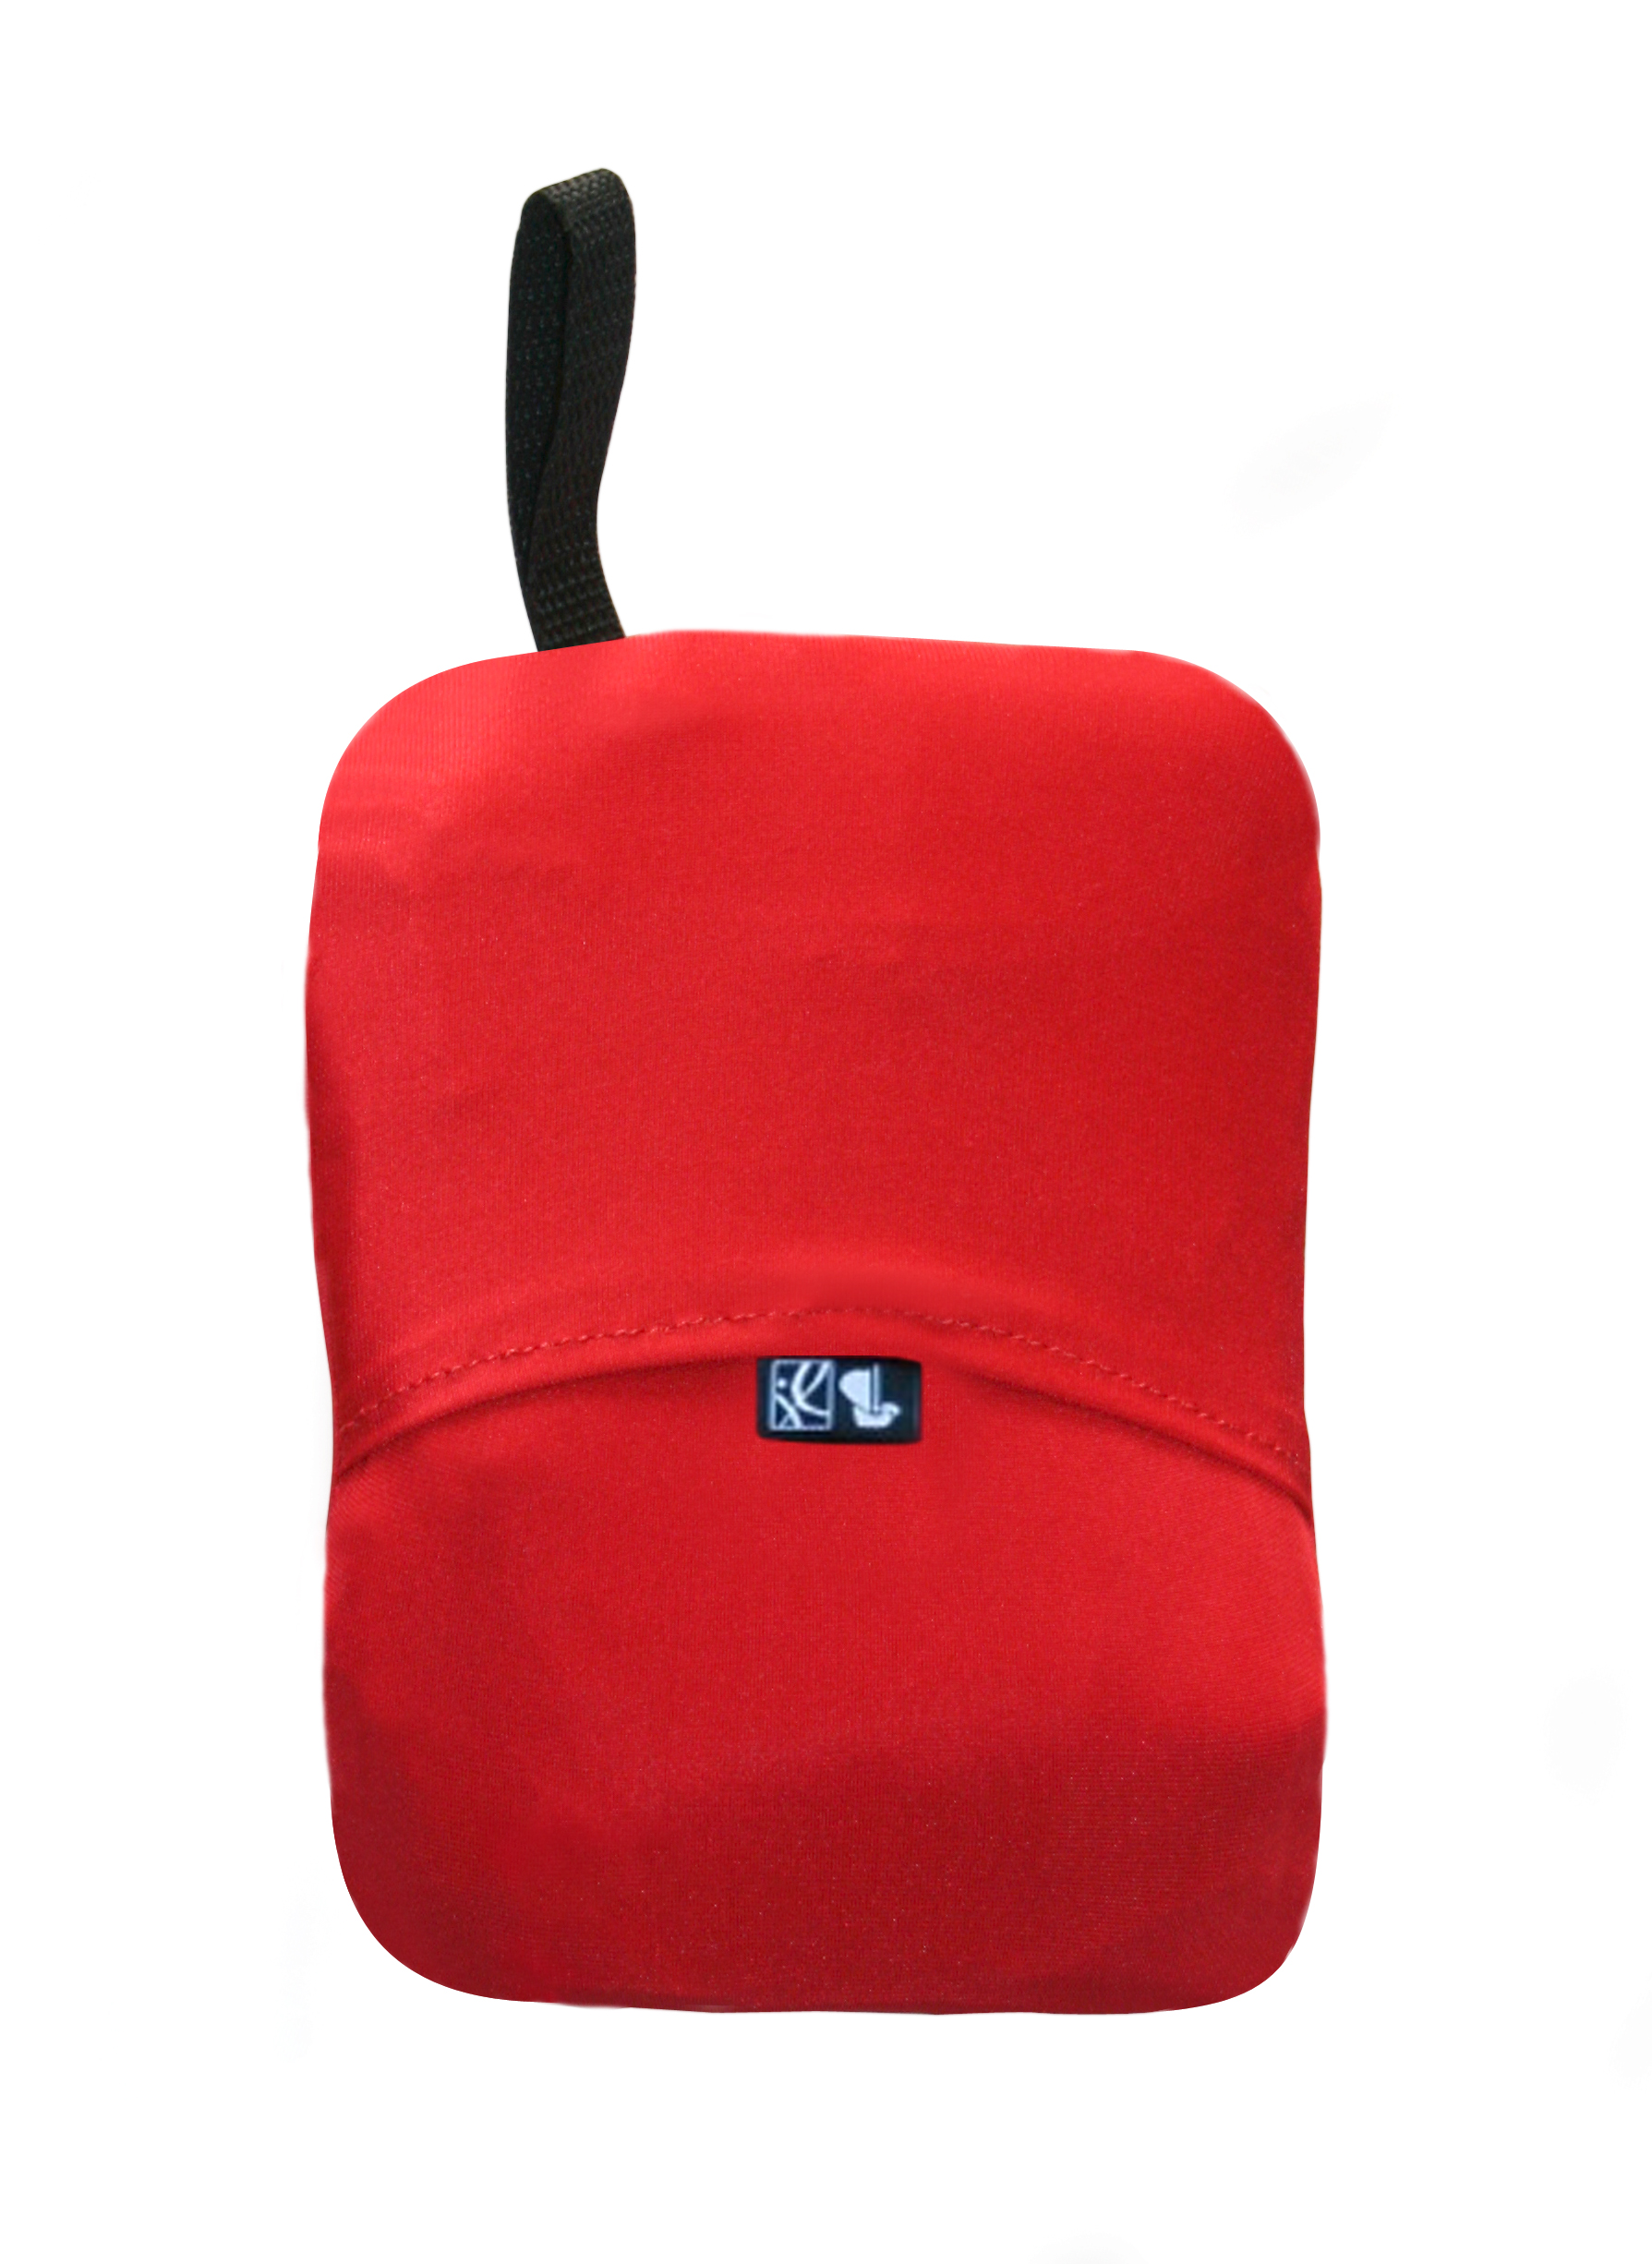 J.L. Childress Gate Check Travel Bag for Car Seats, Red - image 5 of 10